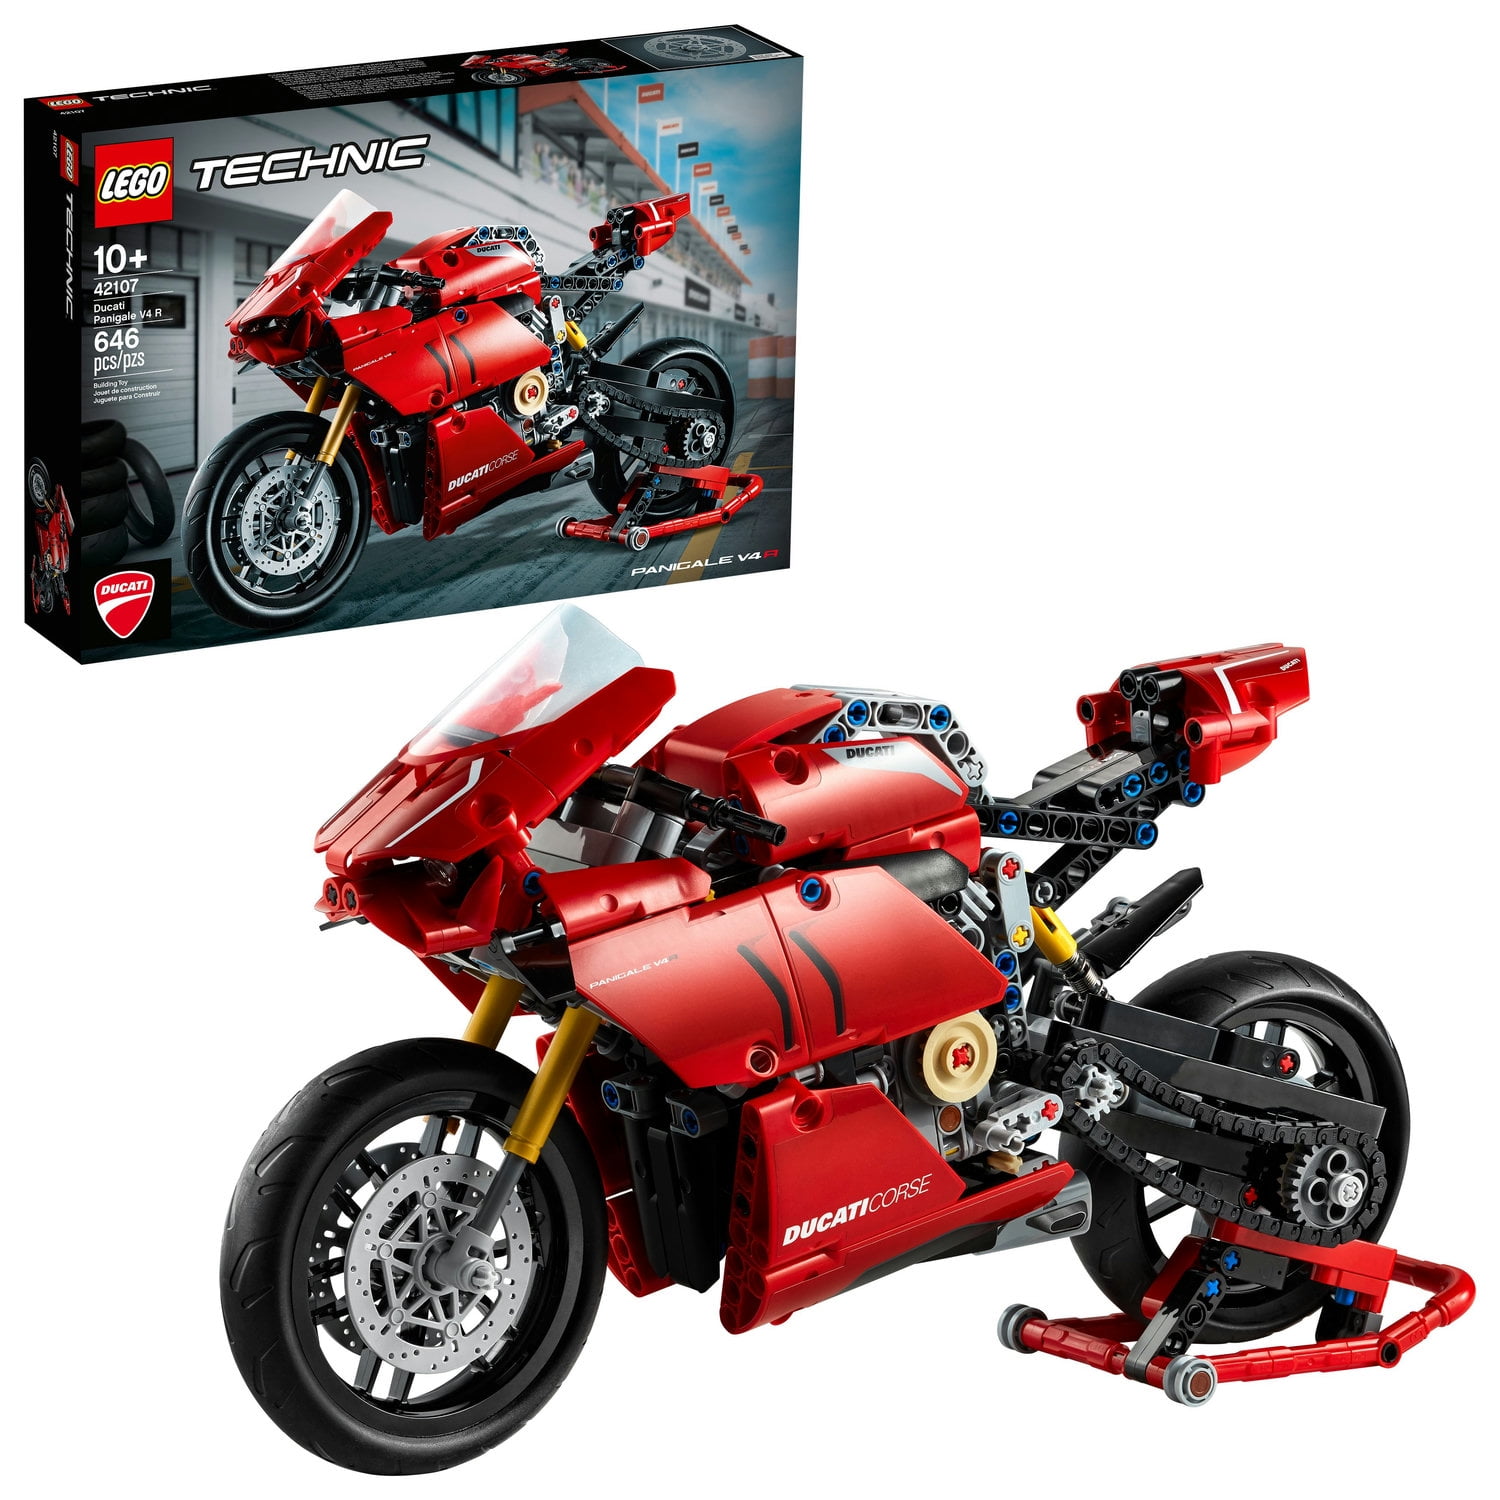 for sale online LEGO Ducati Panigale V4 R Technic 42107 